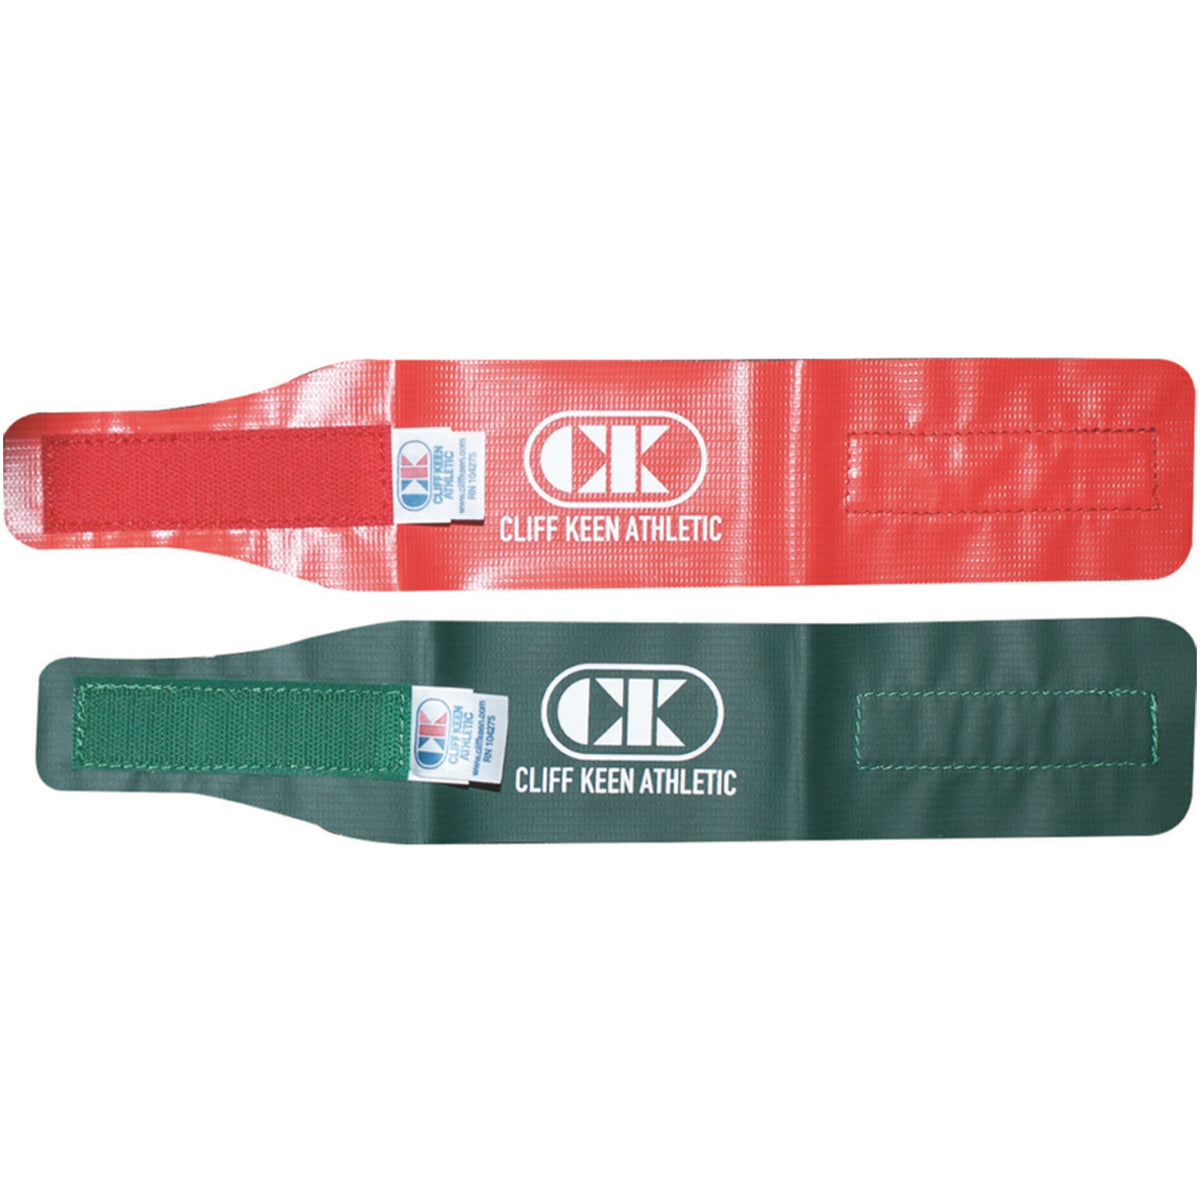 Cliff Keen Wrestling Folkstyle Ankle Band 4-Pack - Red/Green Cliff Keen